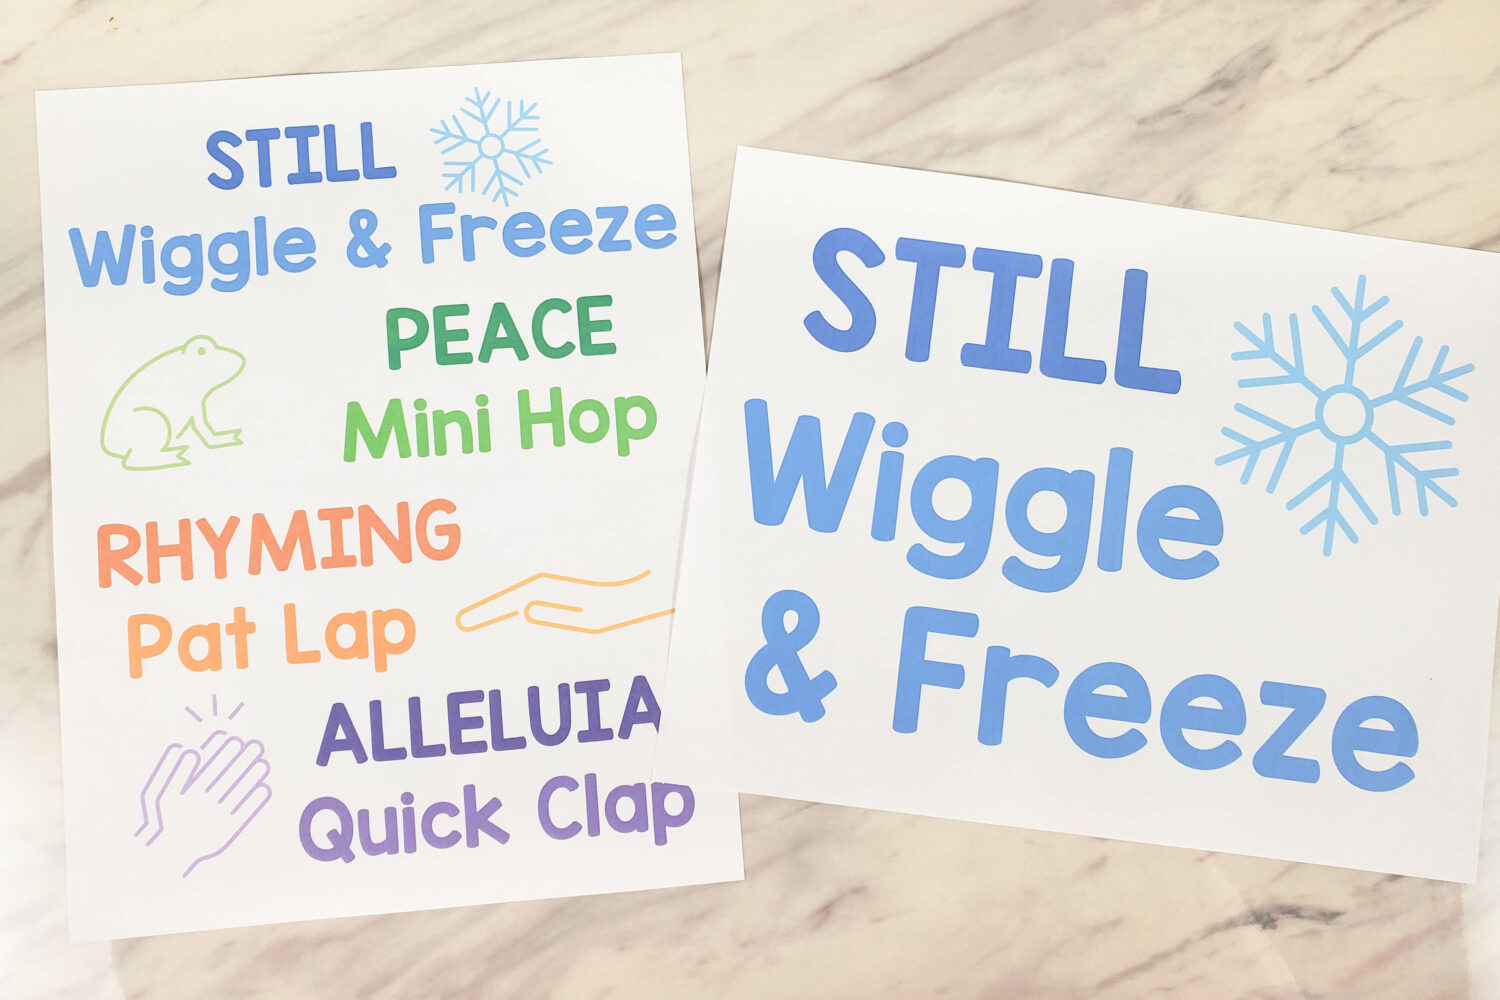 Prince of Peace Movement Words singing time idea - Use these fun mini peaceful actions as you learn the song to make it lots of fun to sing through the song with lots of repetition. You'll find the lesson plan and printable movement actions chart for LDS Primary music leaders.